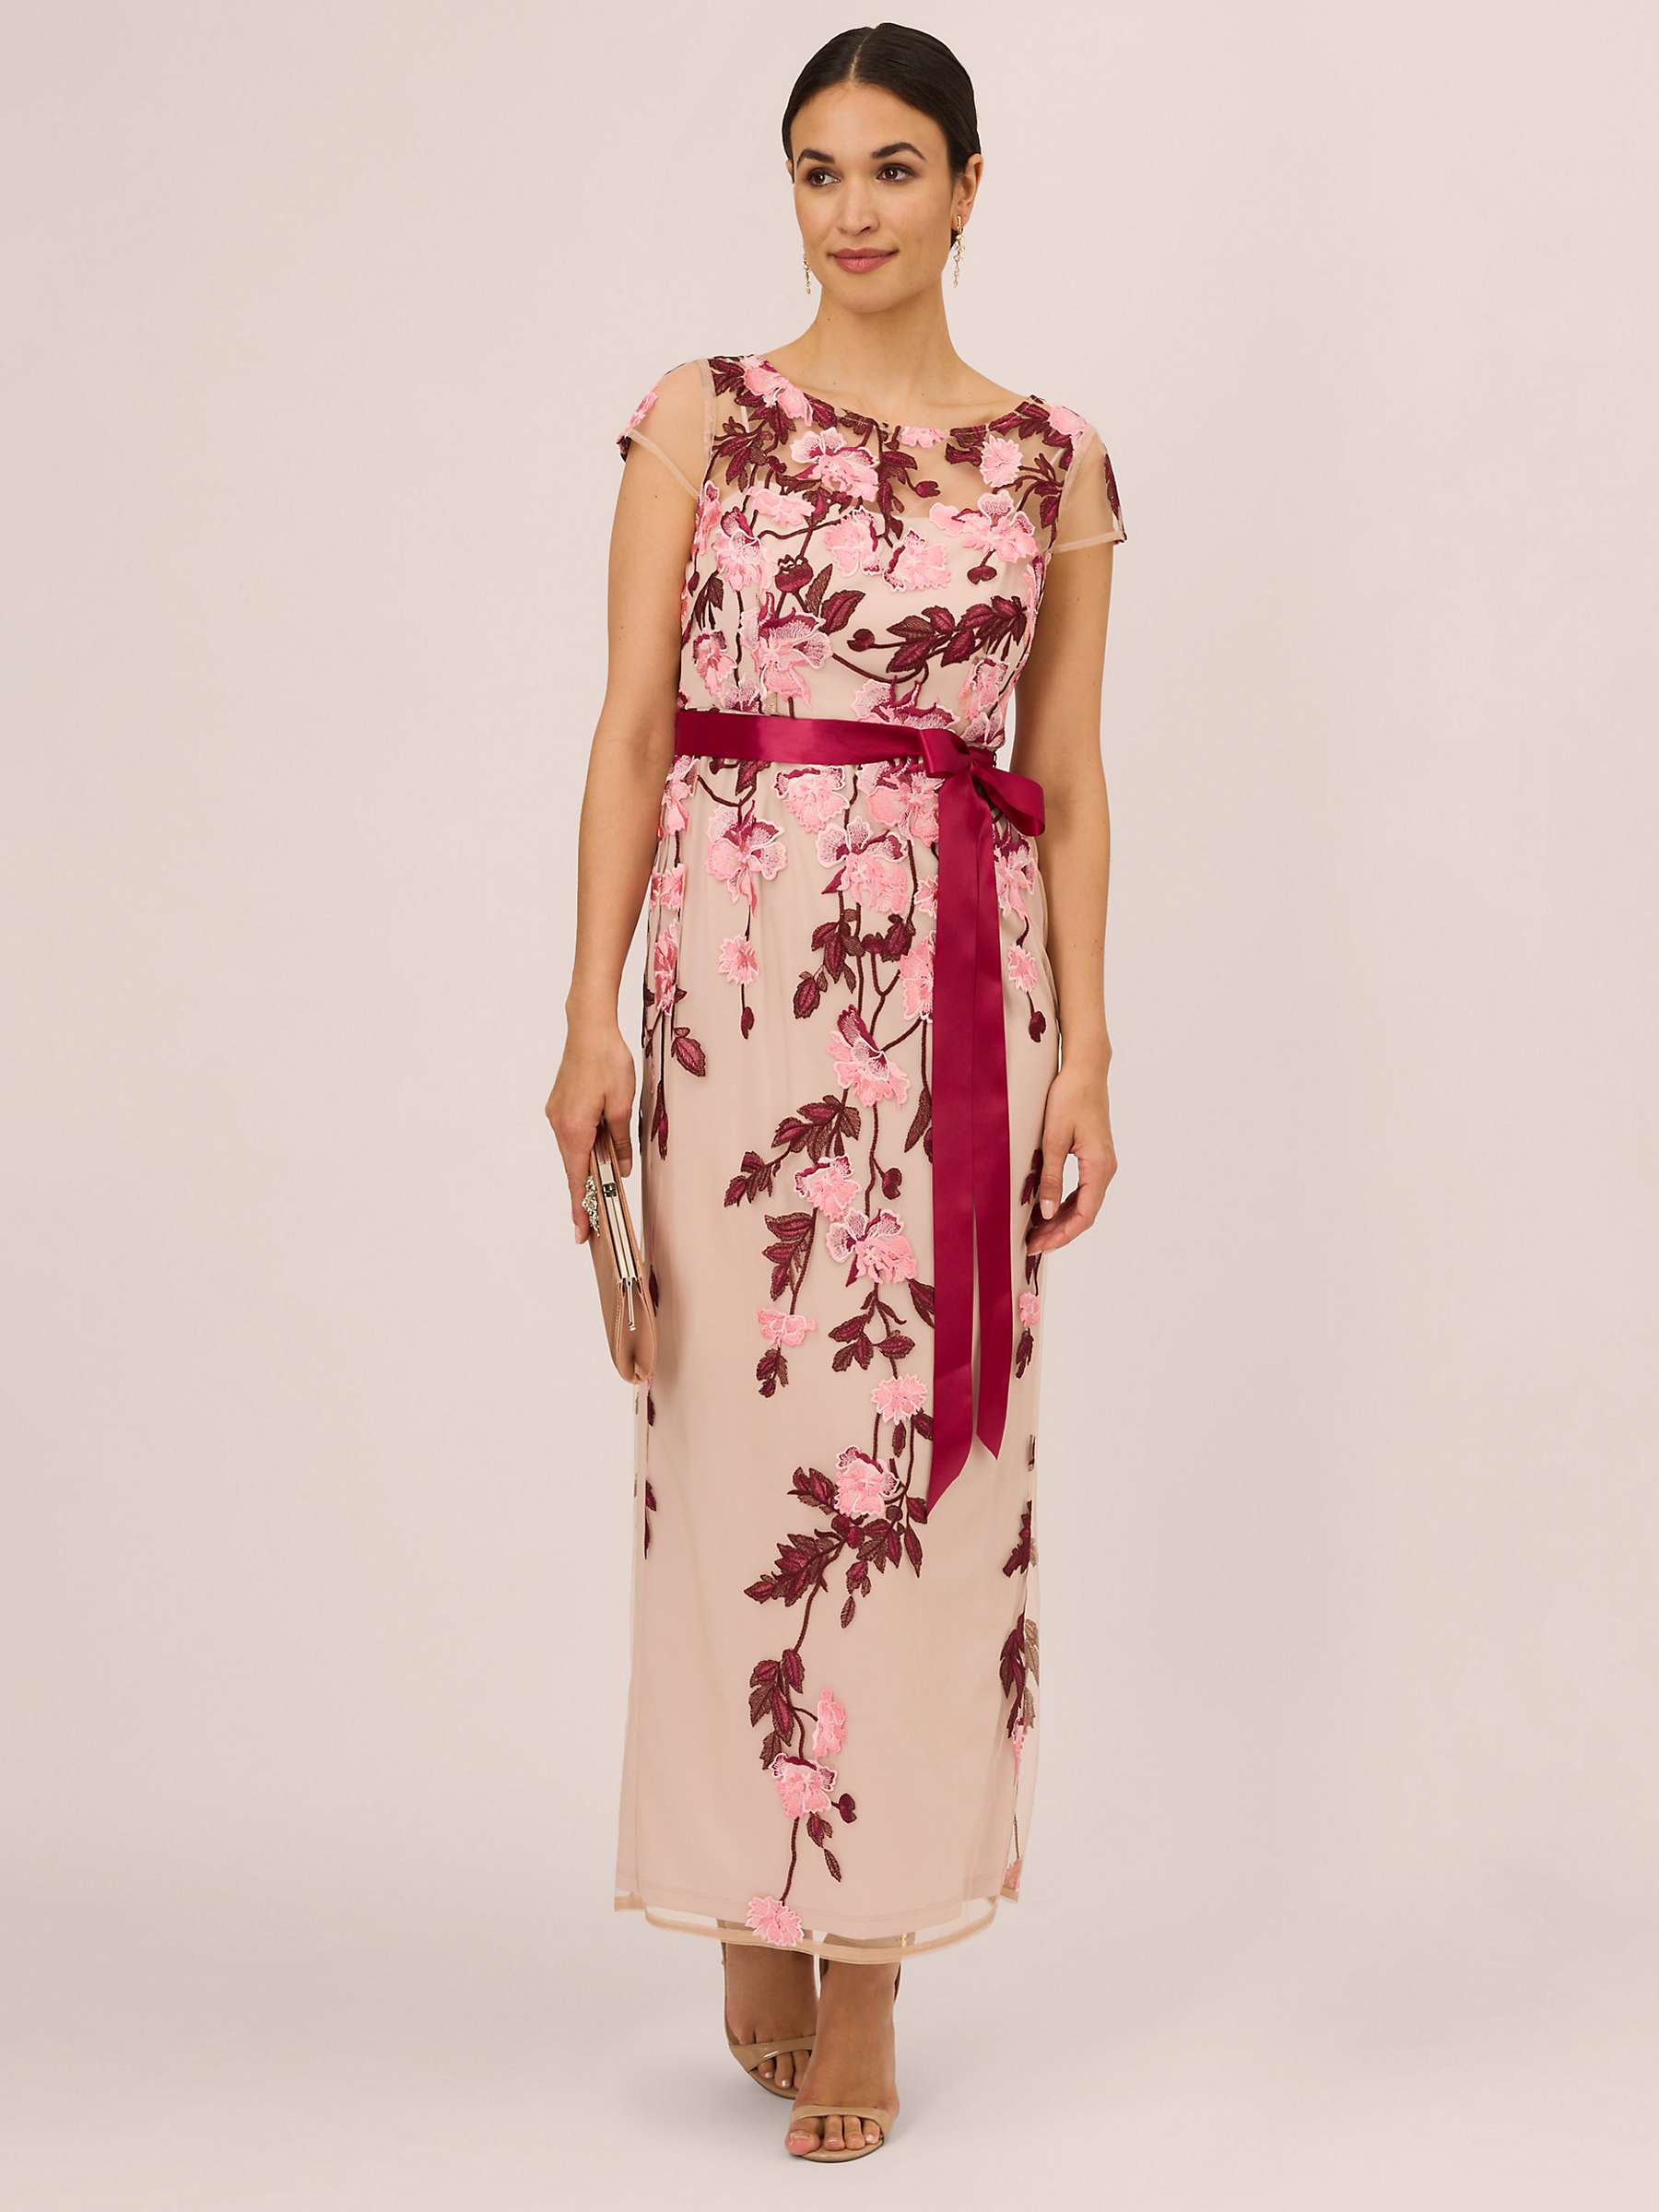 Buy Adrianna Papell Floral Embroidered Maxi Dress, Merlot/Multi Online at johnlewis.com